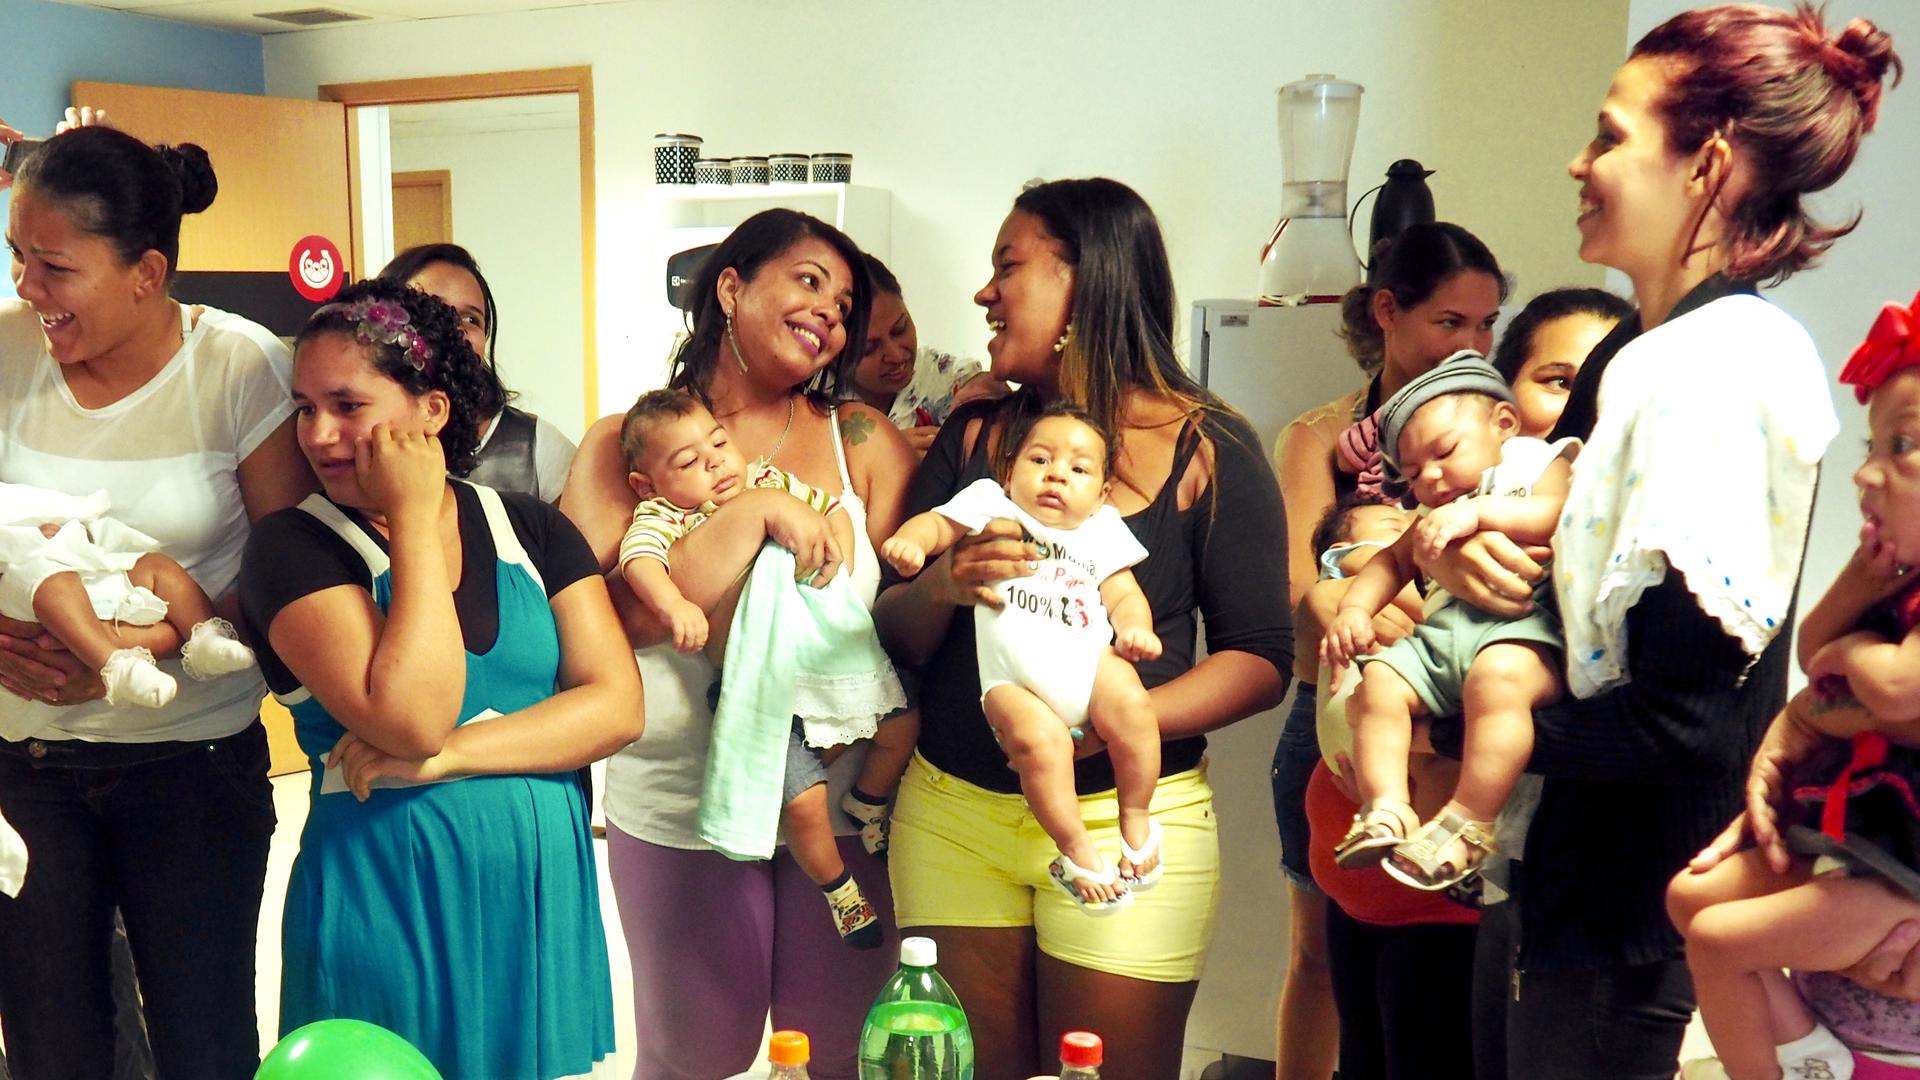 Elaine Marques, 29 (center left) smiles at Germana Soares, 24, at a group birthday party for babies born with microcephaly in Recife, Brazil.